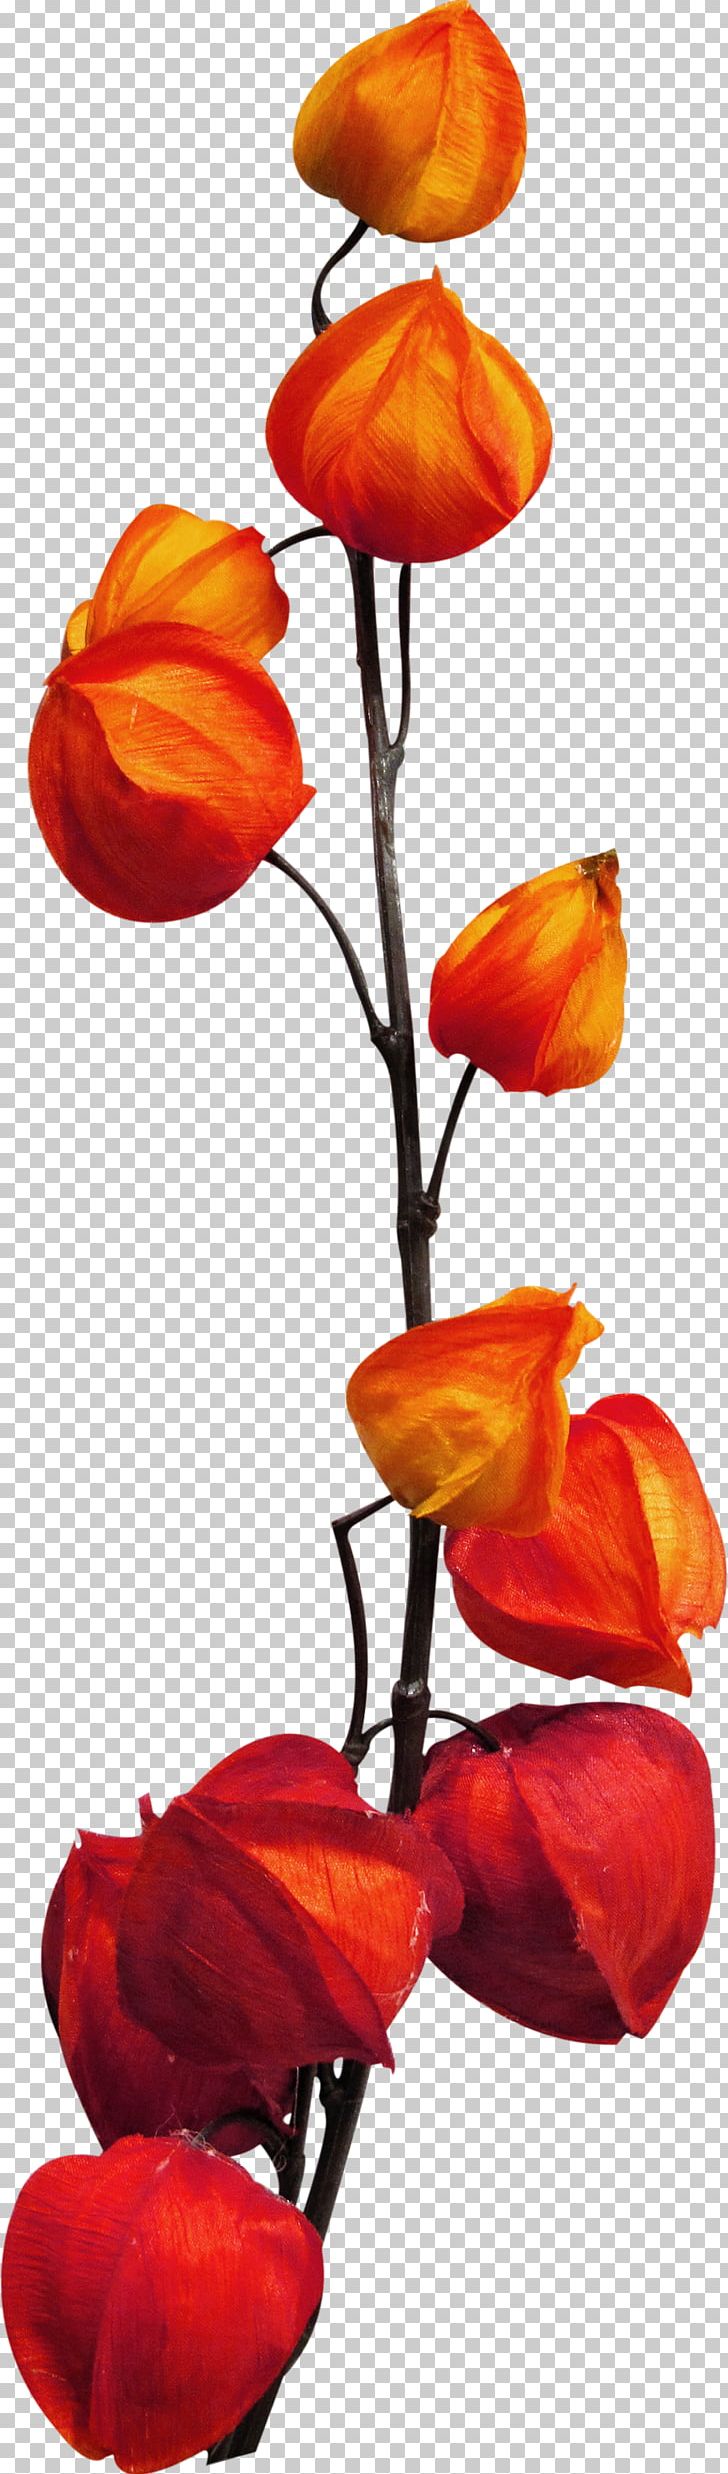 Physalis Fruit Bilberry Vegetable PNG, Clipart, Autumn, Berry, Capsicum Annuum, Cut Flowers, Drawing Free PNG Download